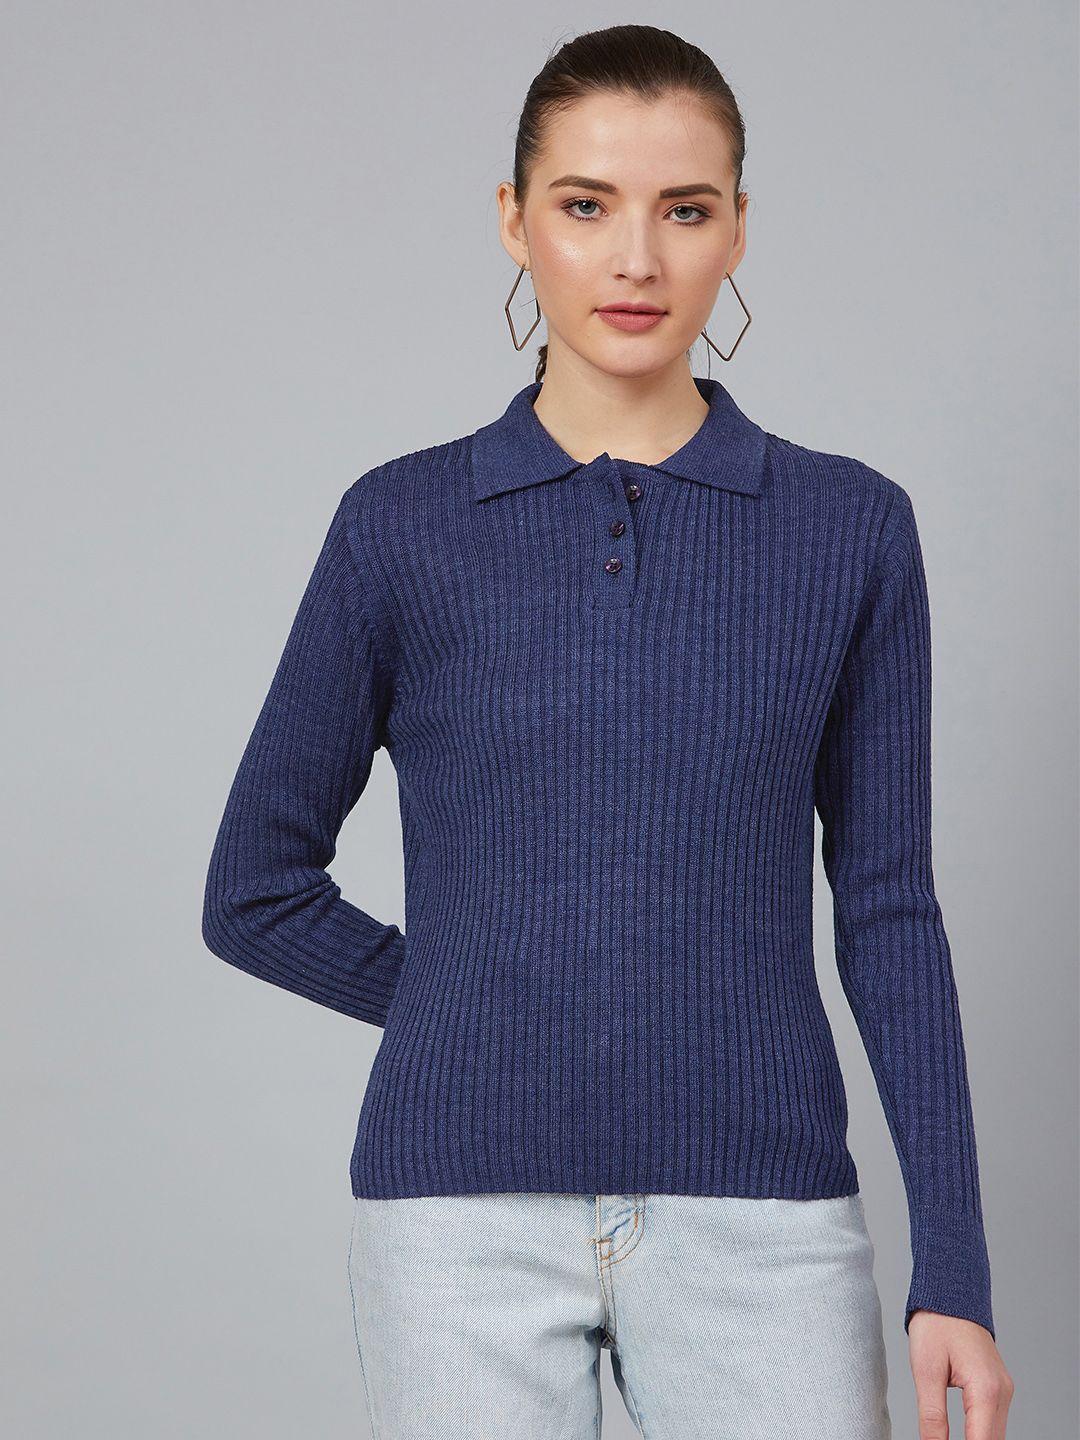 cayman-women-navy-blue-solid-pullover-acrylic-sweater